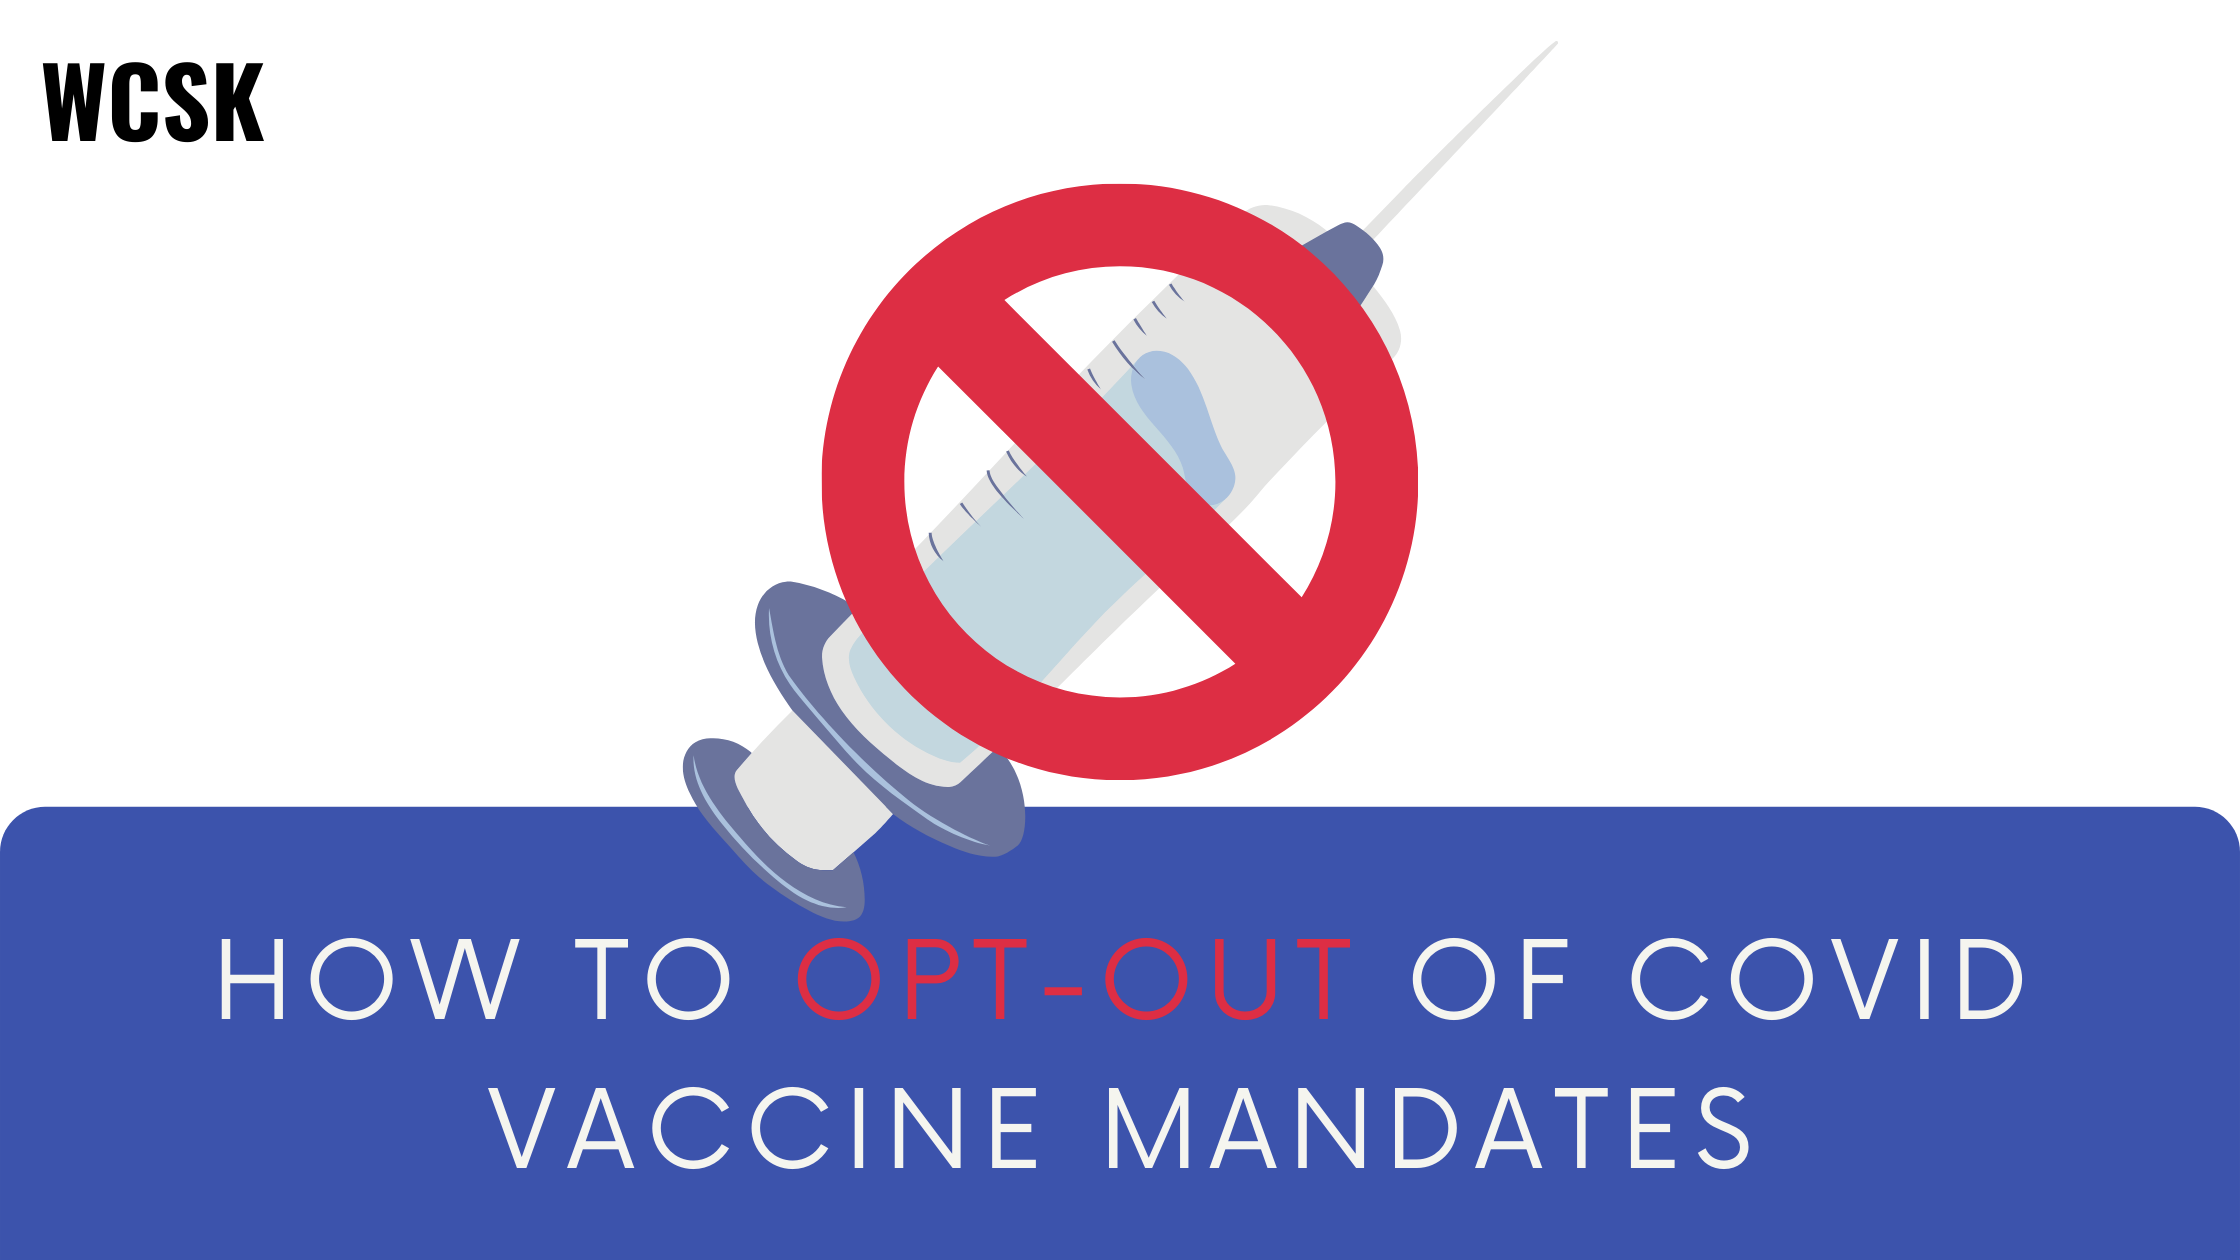 The Religious Exemption: How to Opt-Out of COVID Vaccine Mandates